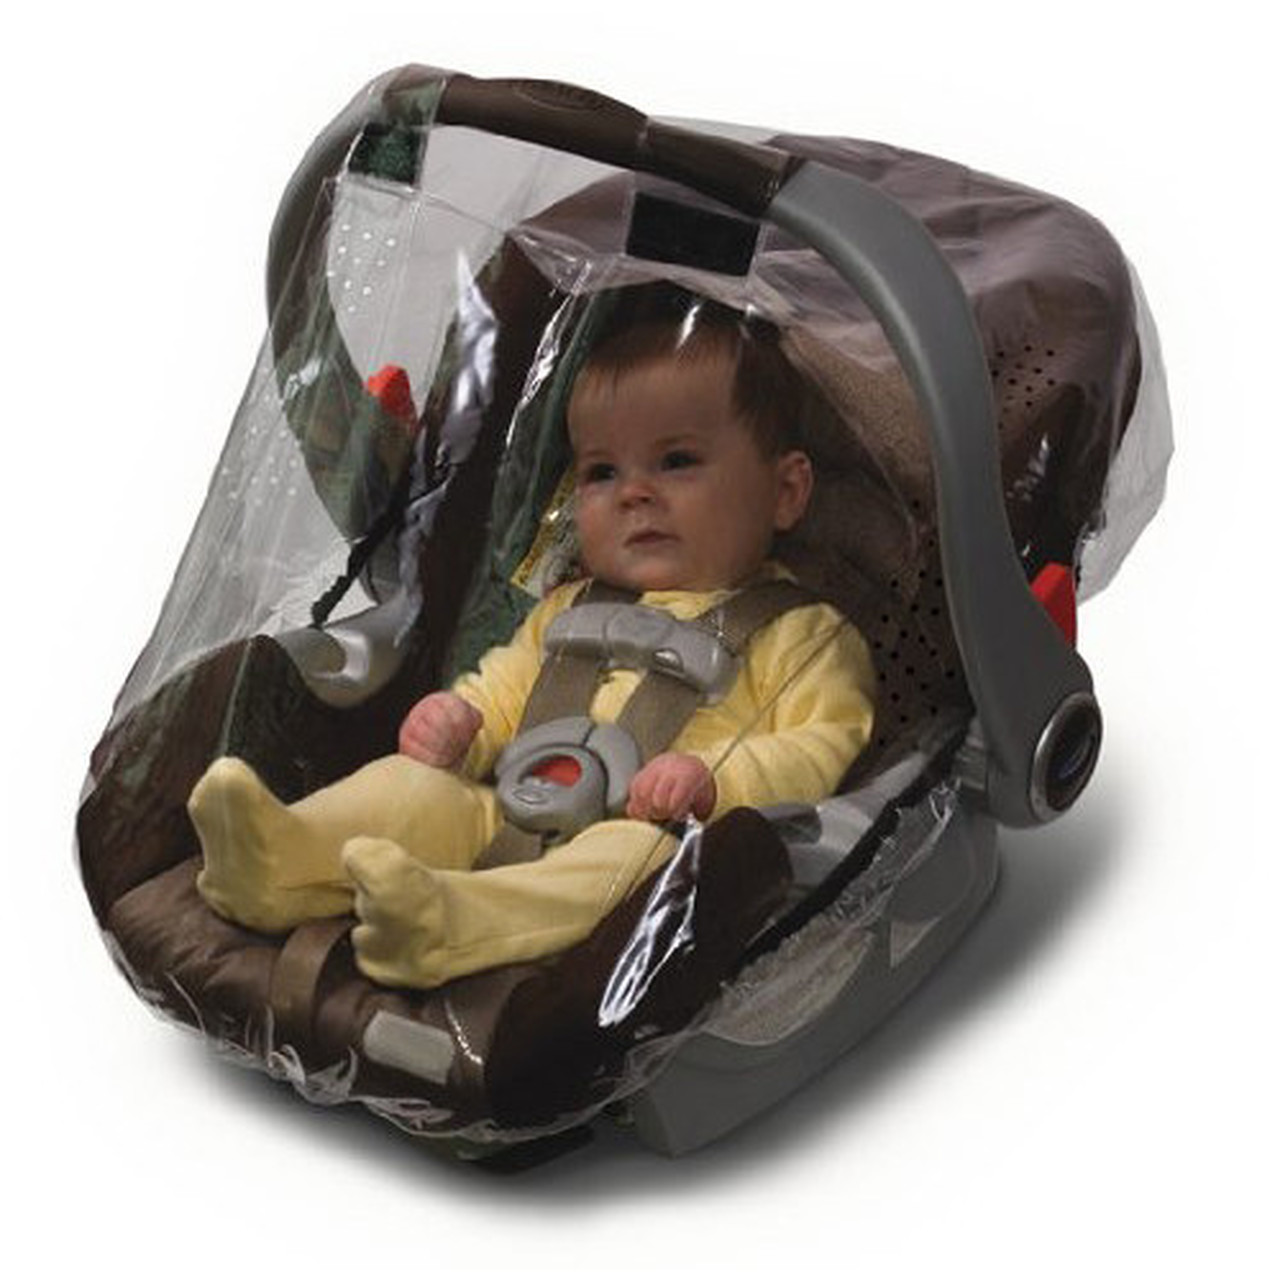 Jolly Jumper Infant Car Seat Weather Shield